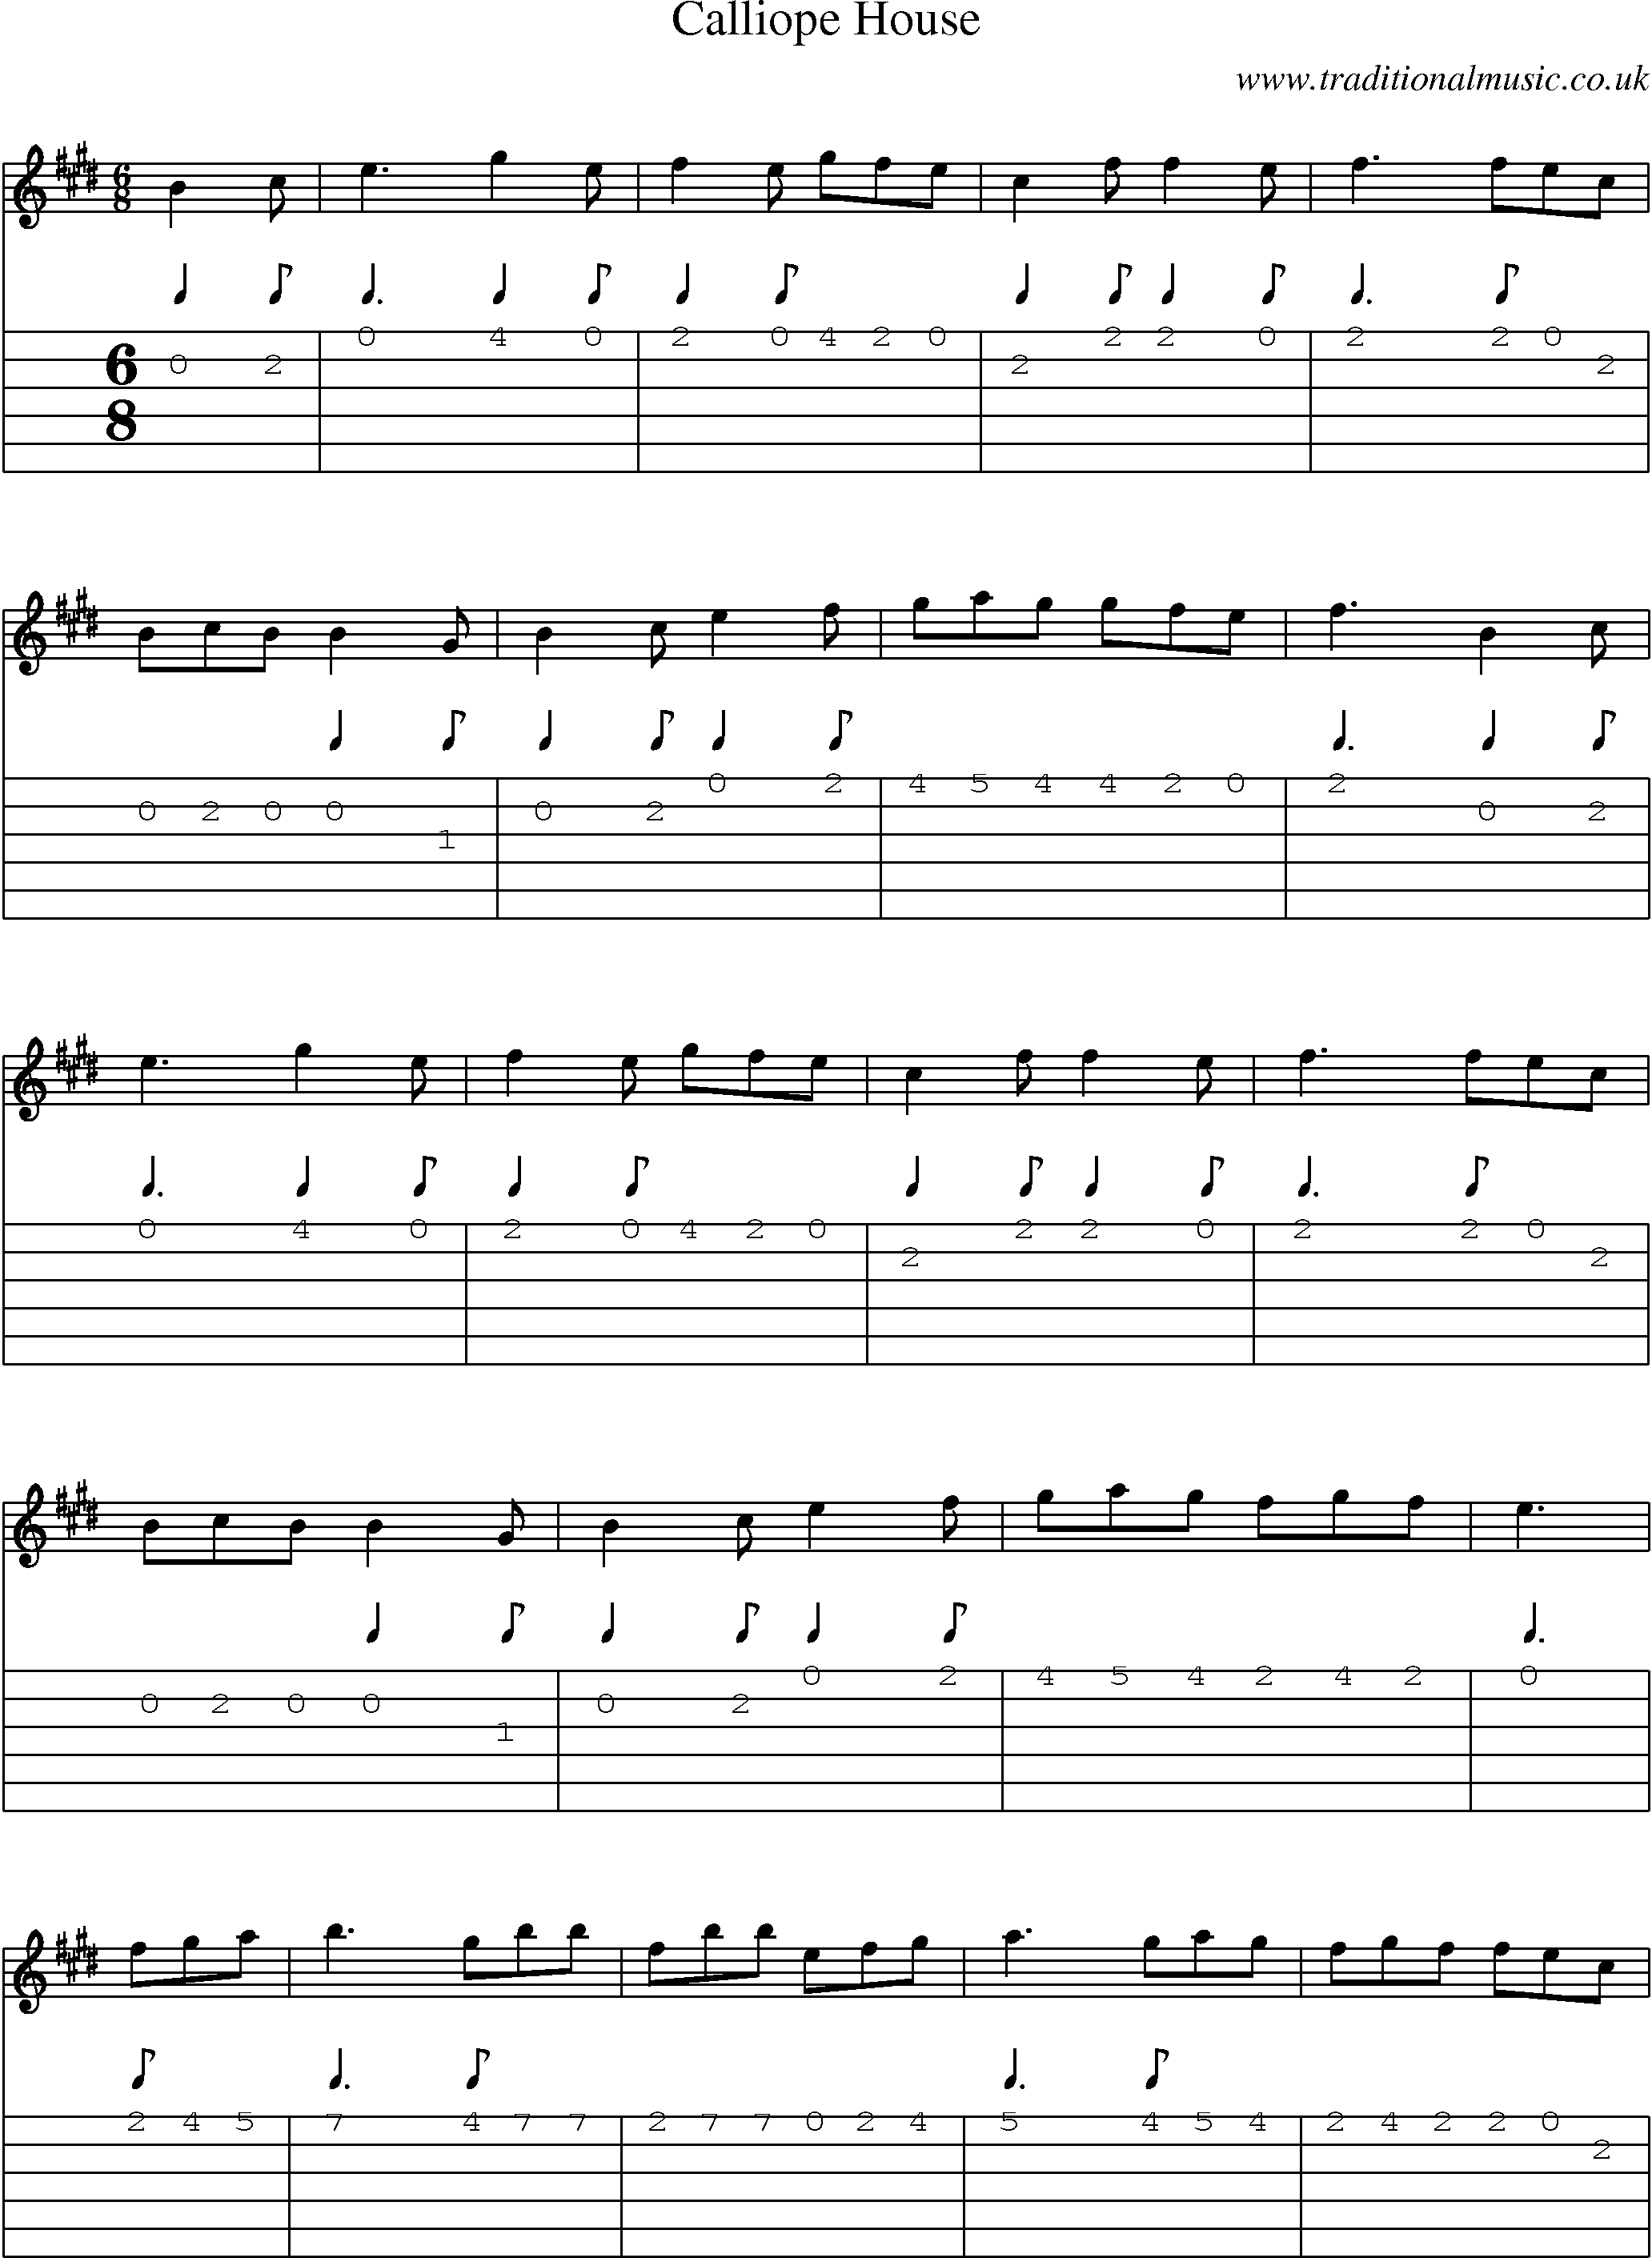 Music Score and Guitar Tabs for Calliope House